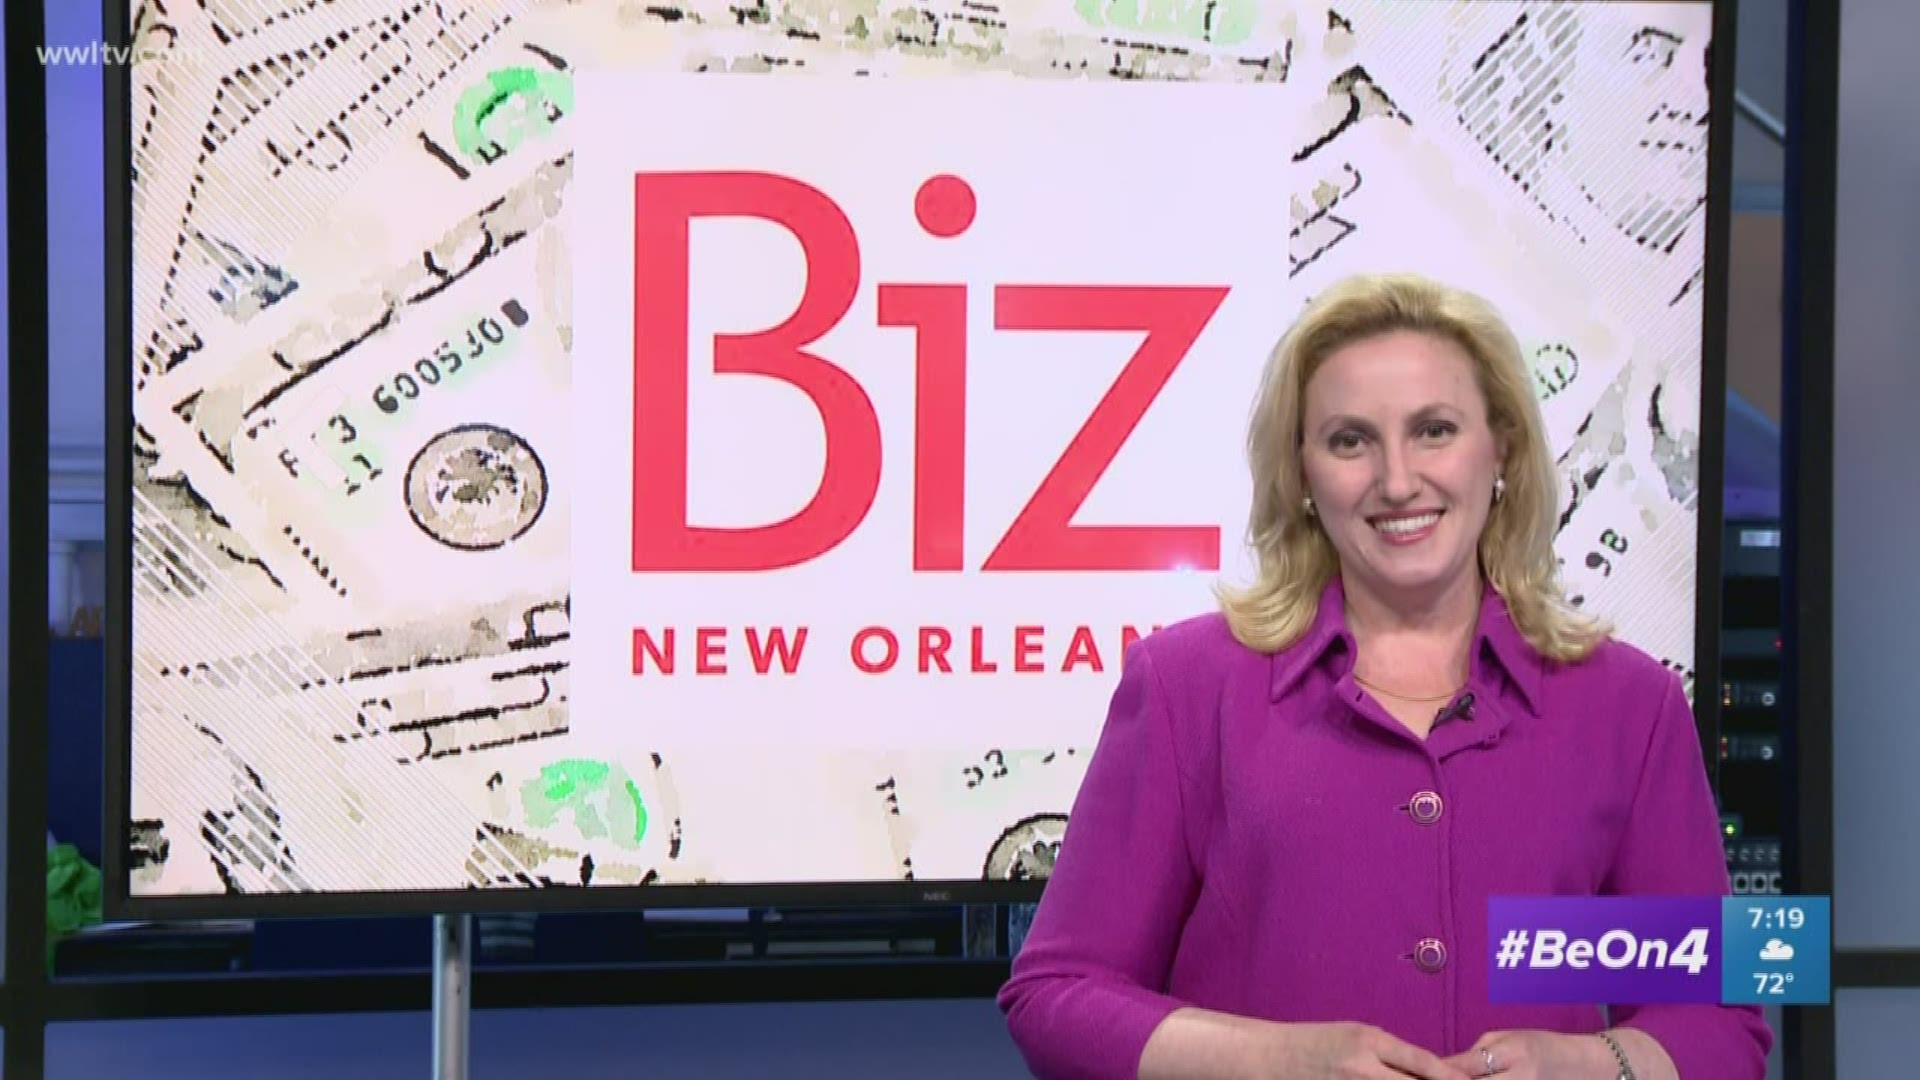 Buying and owning your own home is still the American dream. But how early should you try to make that dream a reality? BizNewOrleans.com's Leslie Snadowsky, video blogger with Biz New Orleans, says the new target age is 35, and there’s lots of help you can find to get you there.